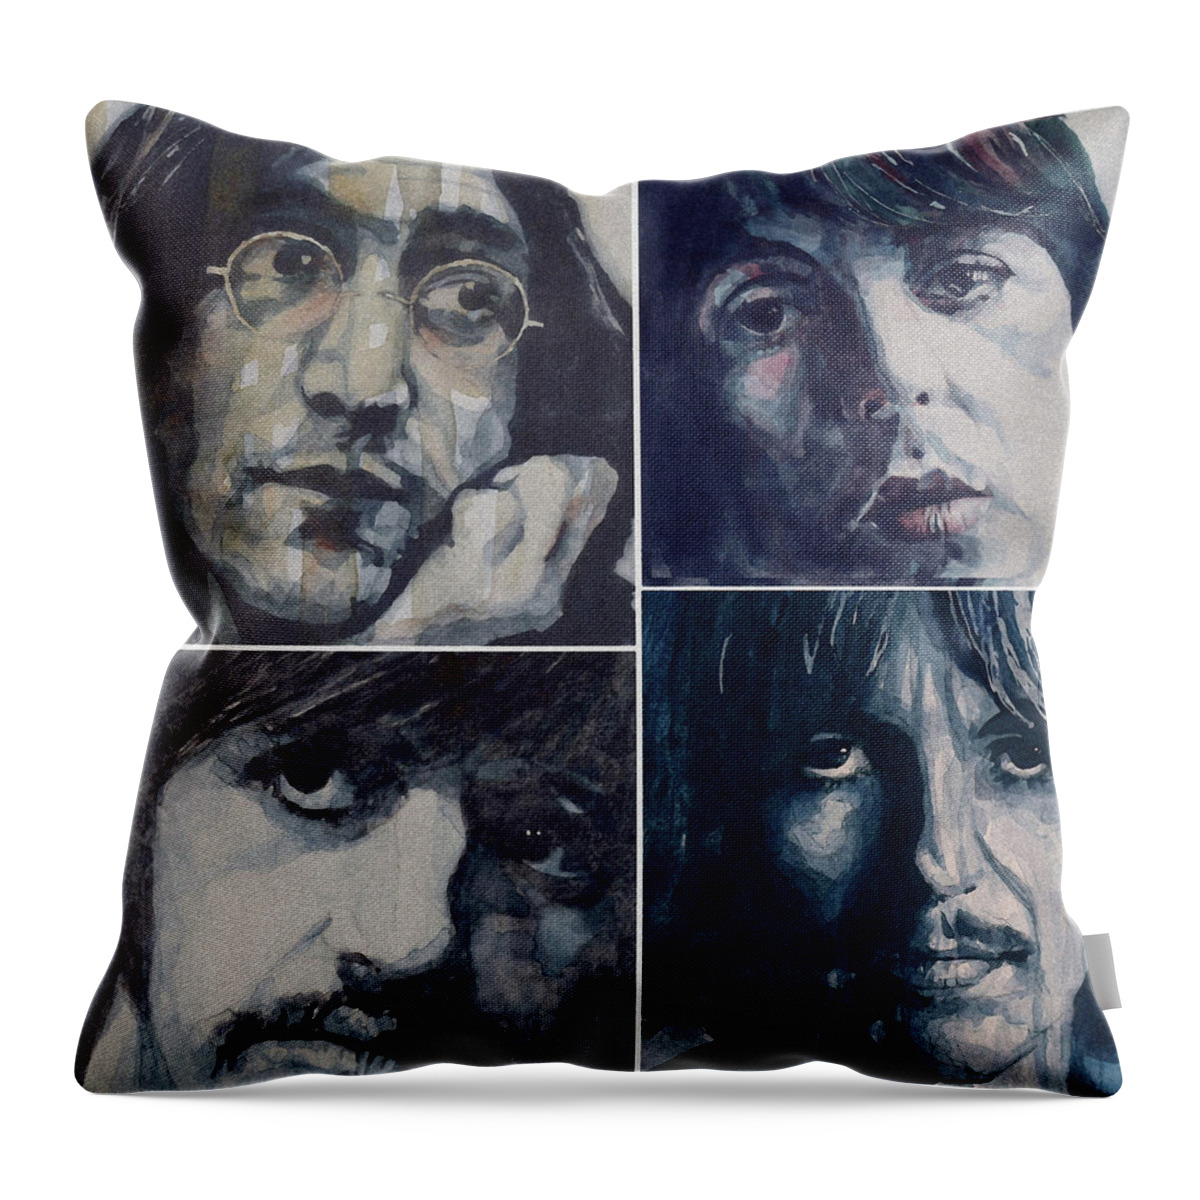 The Beatles Art Throw Pillow featuring the painting The Beatles - Reunion by Paul Lovering